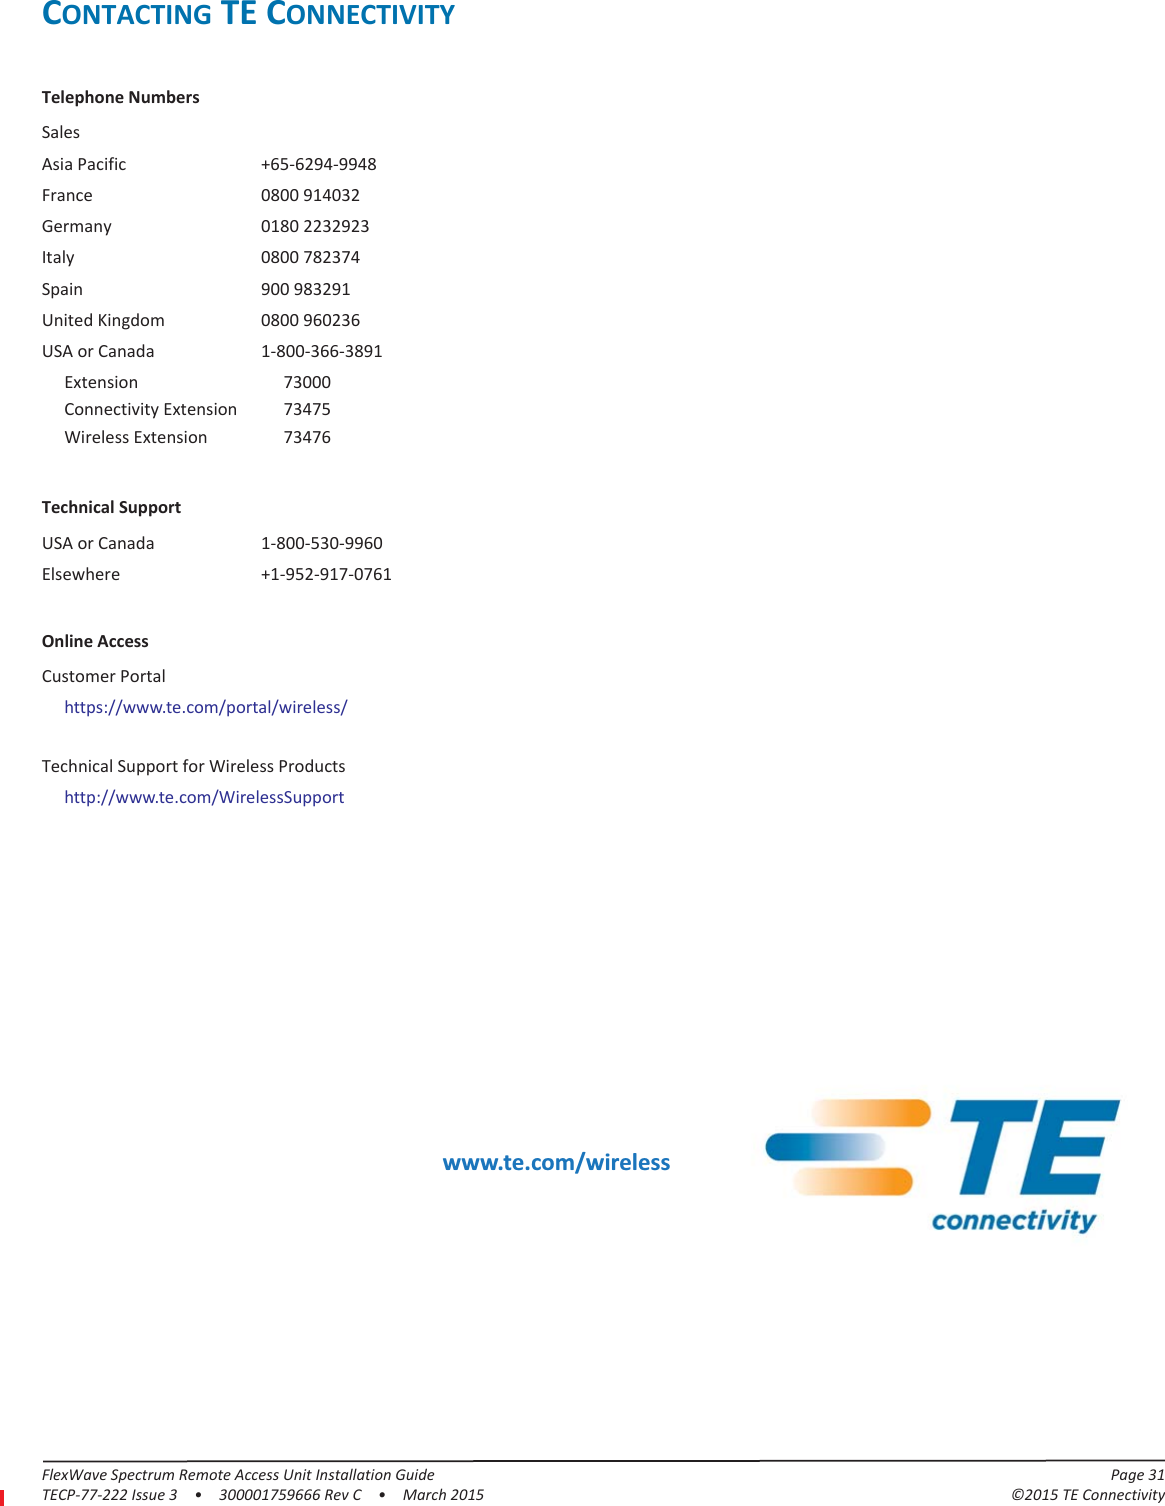 FlexWave Spectrum Remote Access Unit Installation Guide Page 31TECP-77-222 Issue 3  •  300001759666 Rev C  •  March 2015 ©2015 TE ConnectivityCONTACTING TE CONNECTIVITYTelephone NumbersSalesAsia Pacific +65-6294-9948France 0800 914032Germany 0180 2232923Italy 0800 782374Spain 900 983291United Kingdom 0800 960236USA or Canada 1-800-366-3891Extension 73000Connectivity Extension 73475Wireless Extension 73476Technical SupportUSA or Canada 1-800-530-9960Elsewhere +1-952-917-0761Online AccessCustomer Portalhttps://www.te.com/portal/wireless/Technical Support for Wireless Productshttp://www.te.com/WirelessSupport www.te.com/wireless